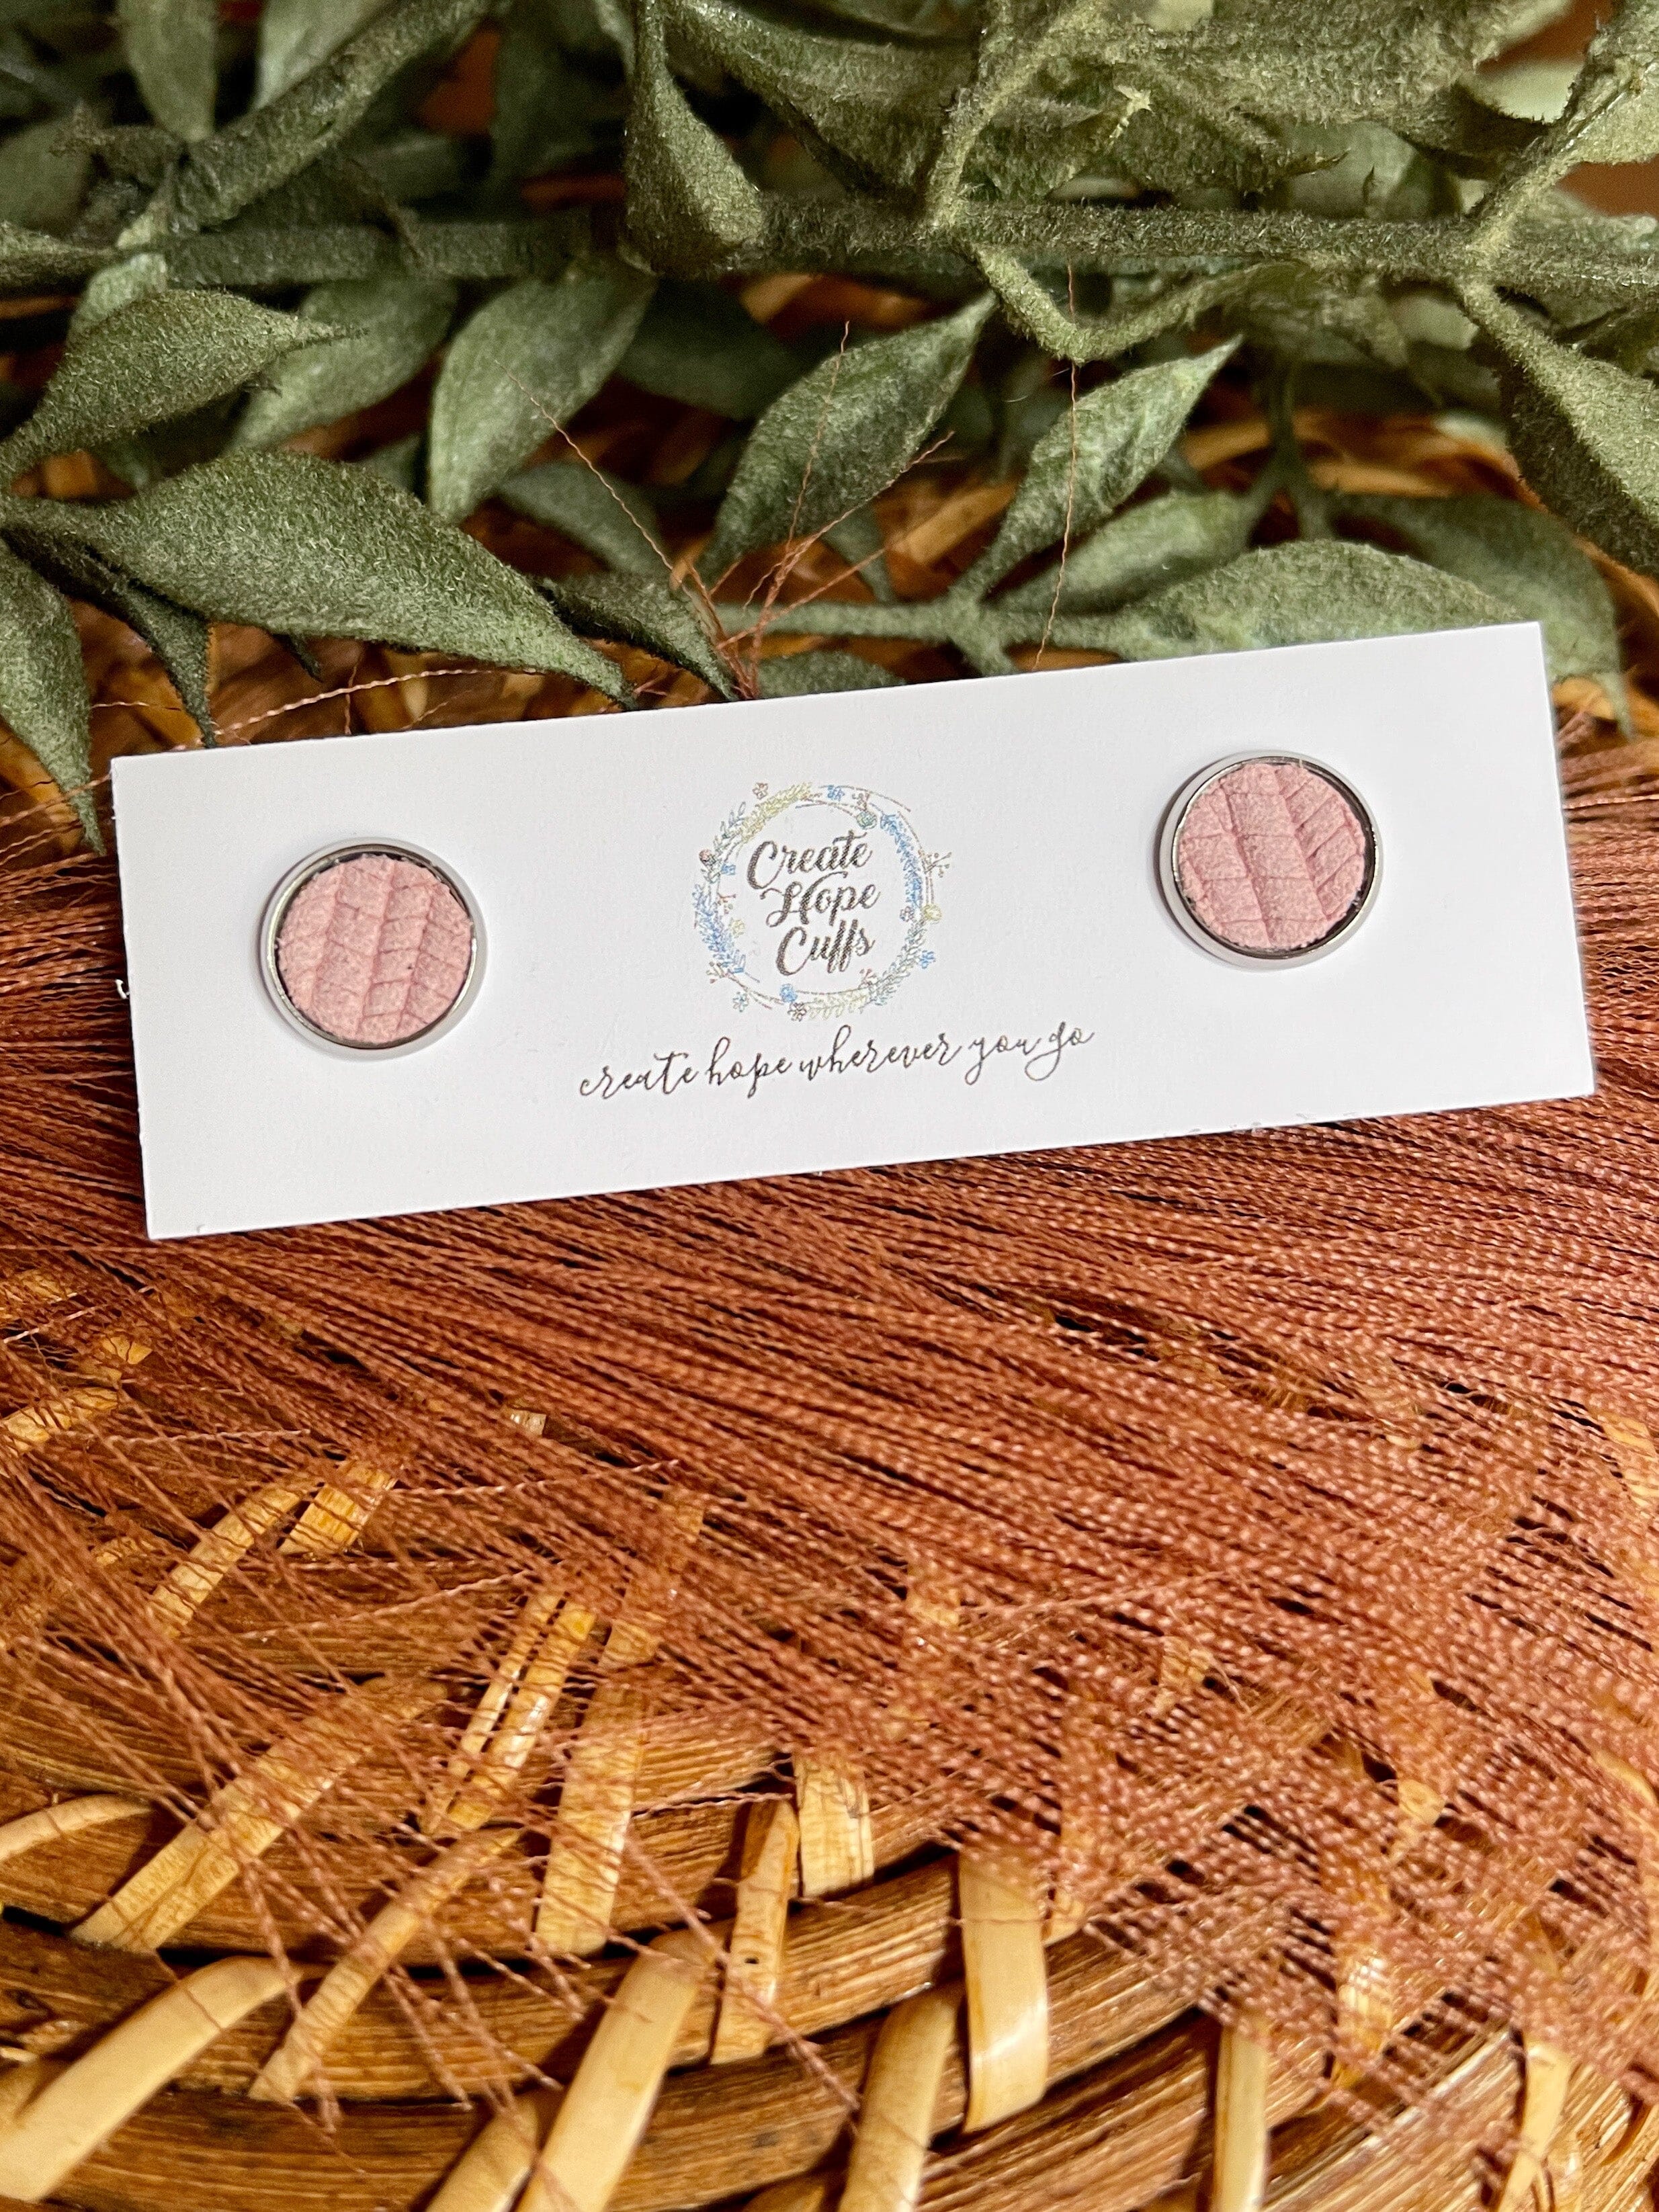 Textured STUD | 10mm | 12 Colors | Leather Earrings, Hypoallergenic Leather Earrings Create Hope Cuffs Blush Pink 